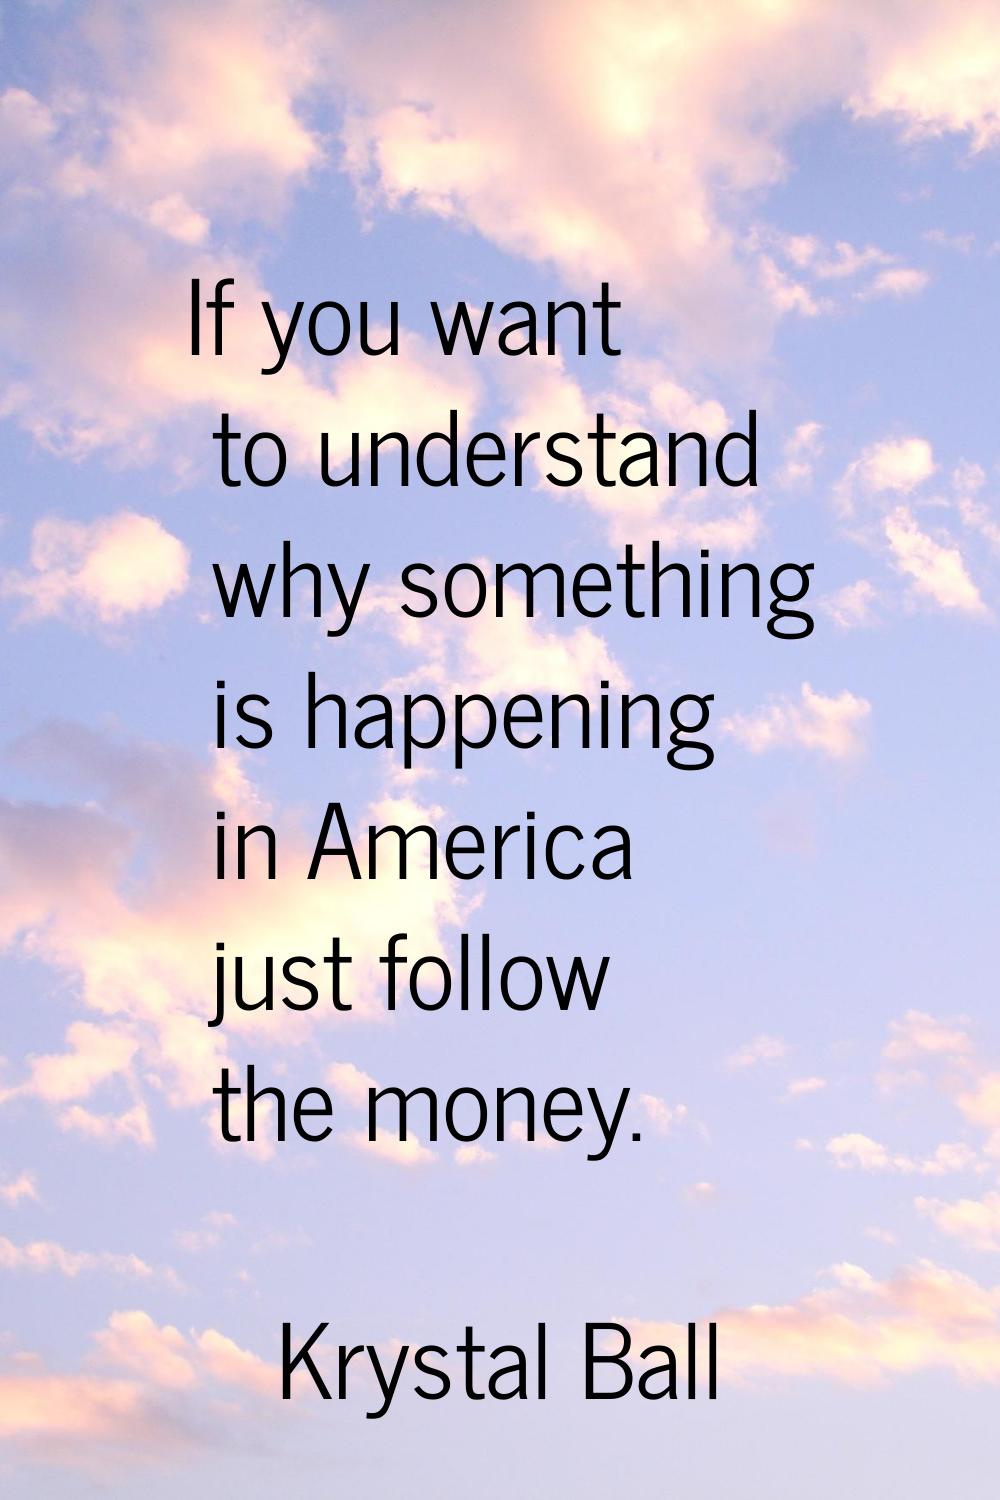 If you want to understand why something is happening in America just follow the money.